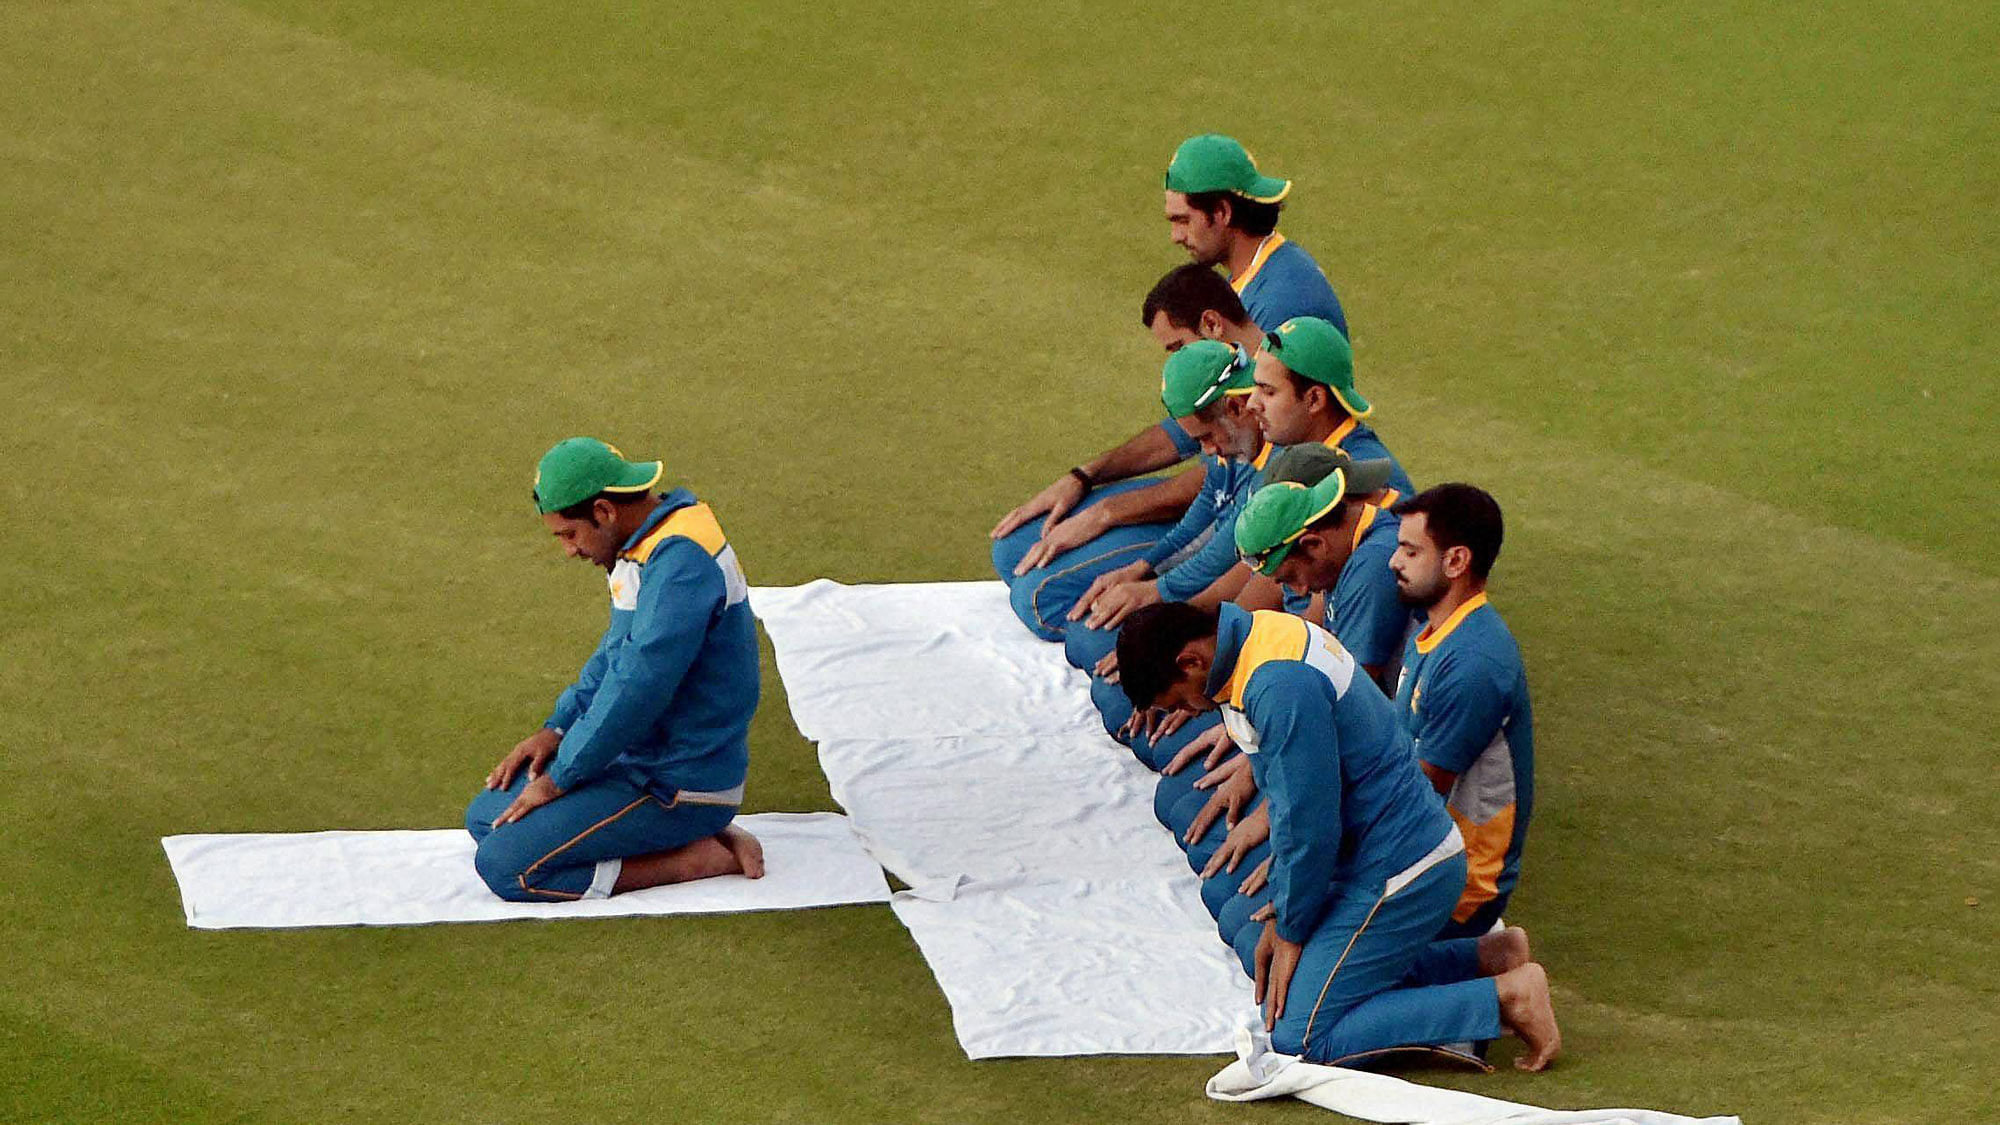 Pakistan’s cricket team offering namaz after a training session at PCA Mohali on the eve of World Cup T20 match against New Zealand on Monday. (Photo: PTI)